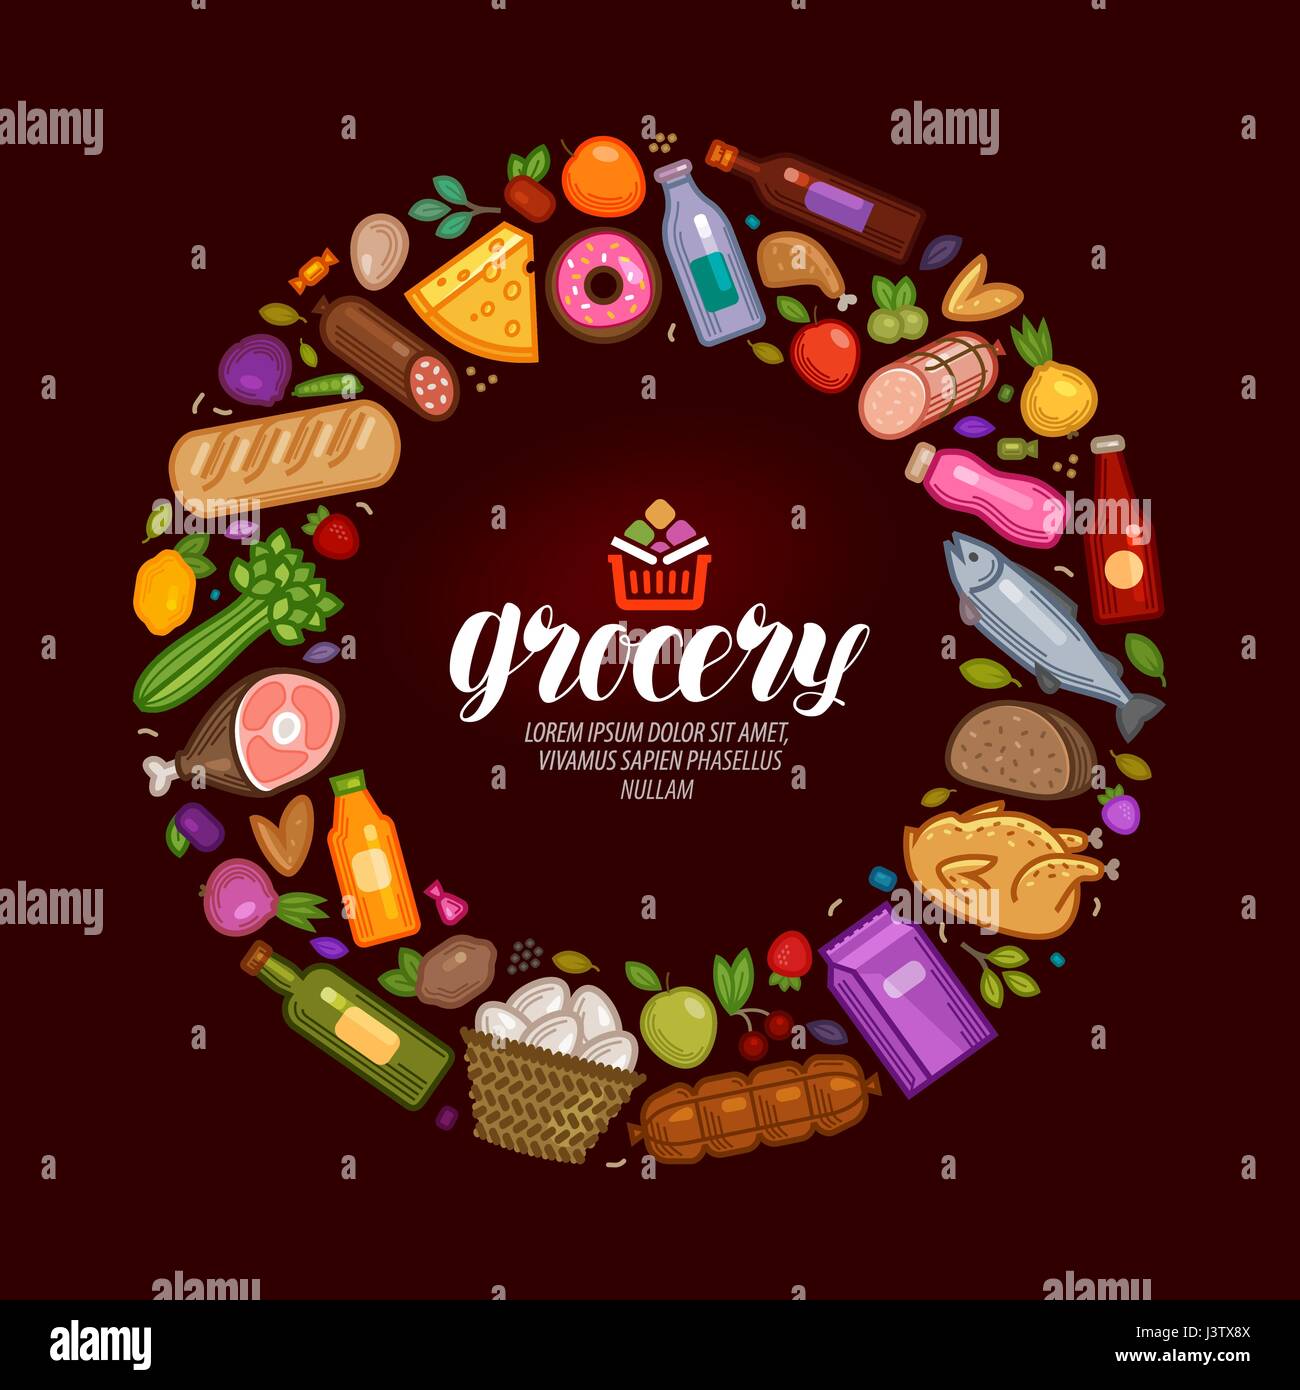 Grocery banner. Food and drinks icons set. Vector illustration Stock Vector